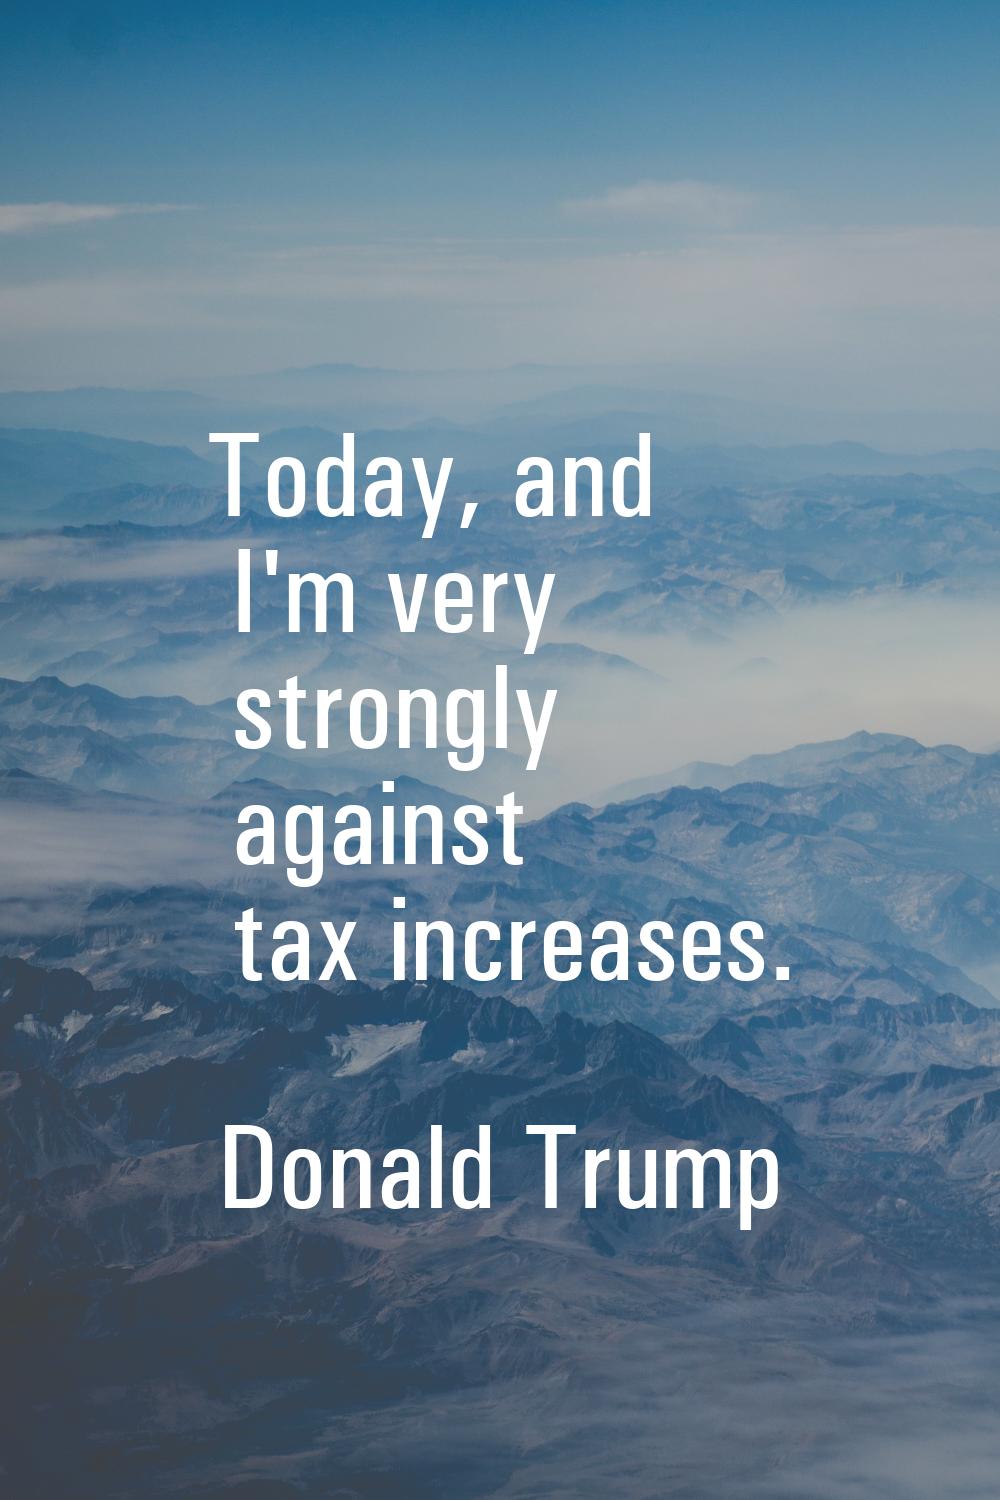 Today, and I'm very strongly against tax increases.